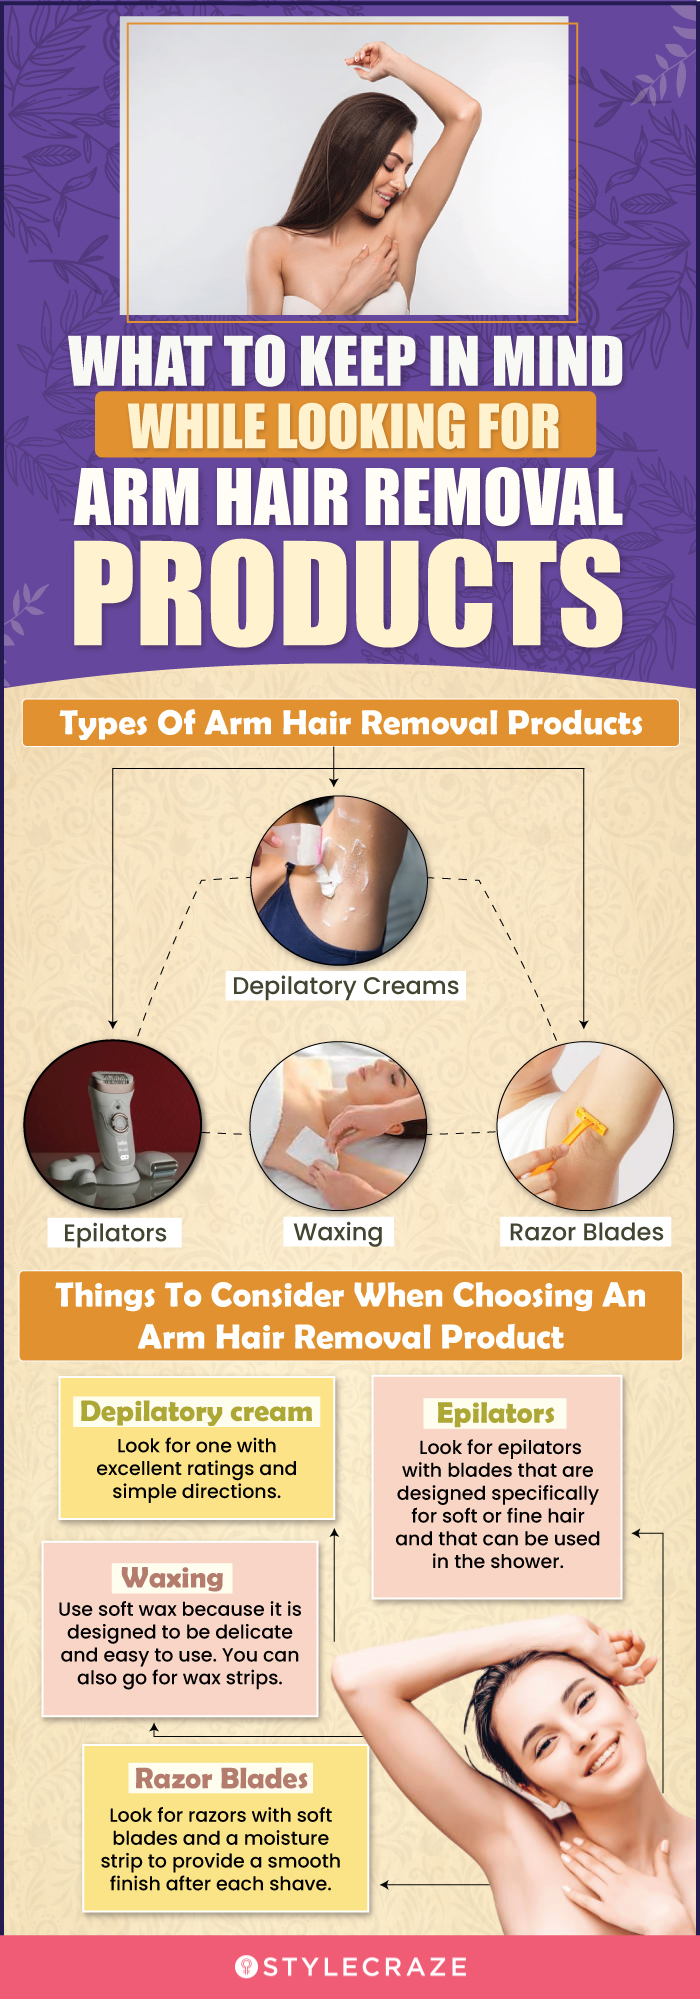 What To Keep In Mind While Looking For Arm Hair Removal